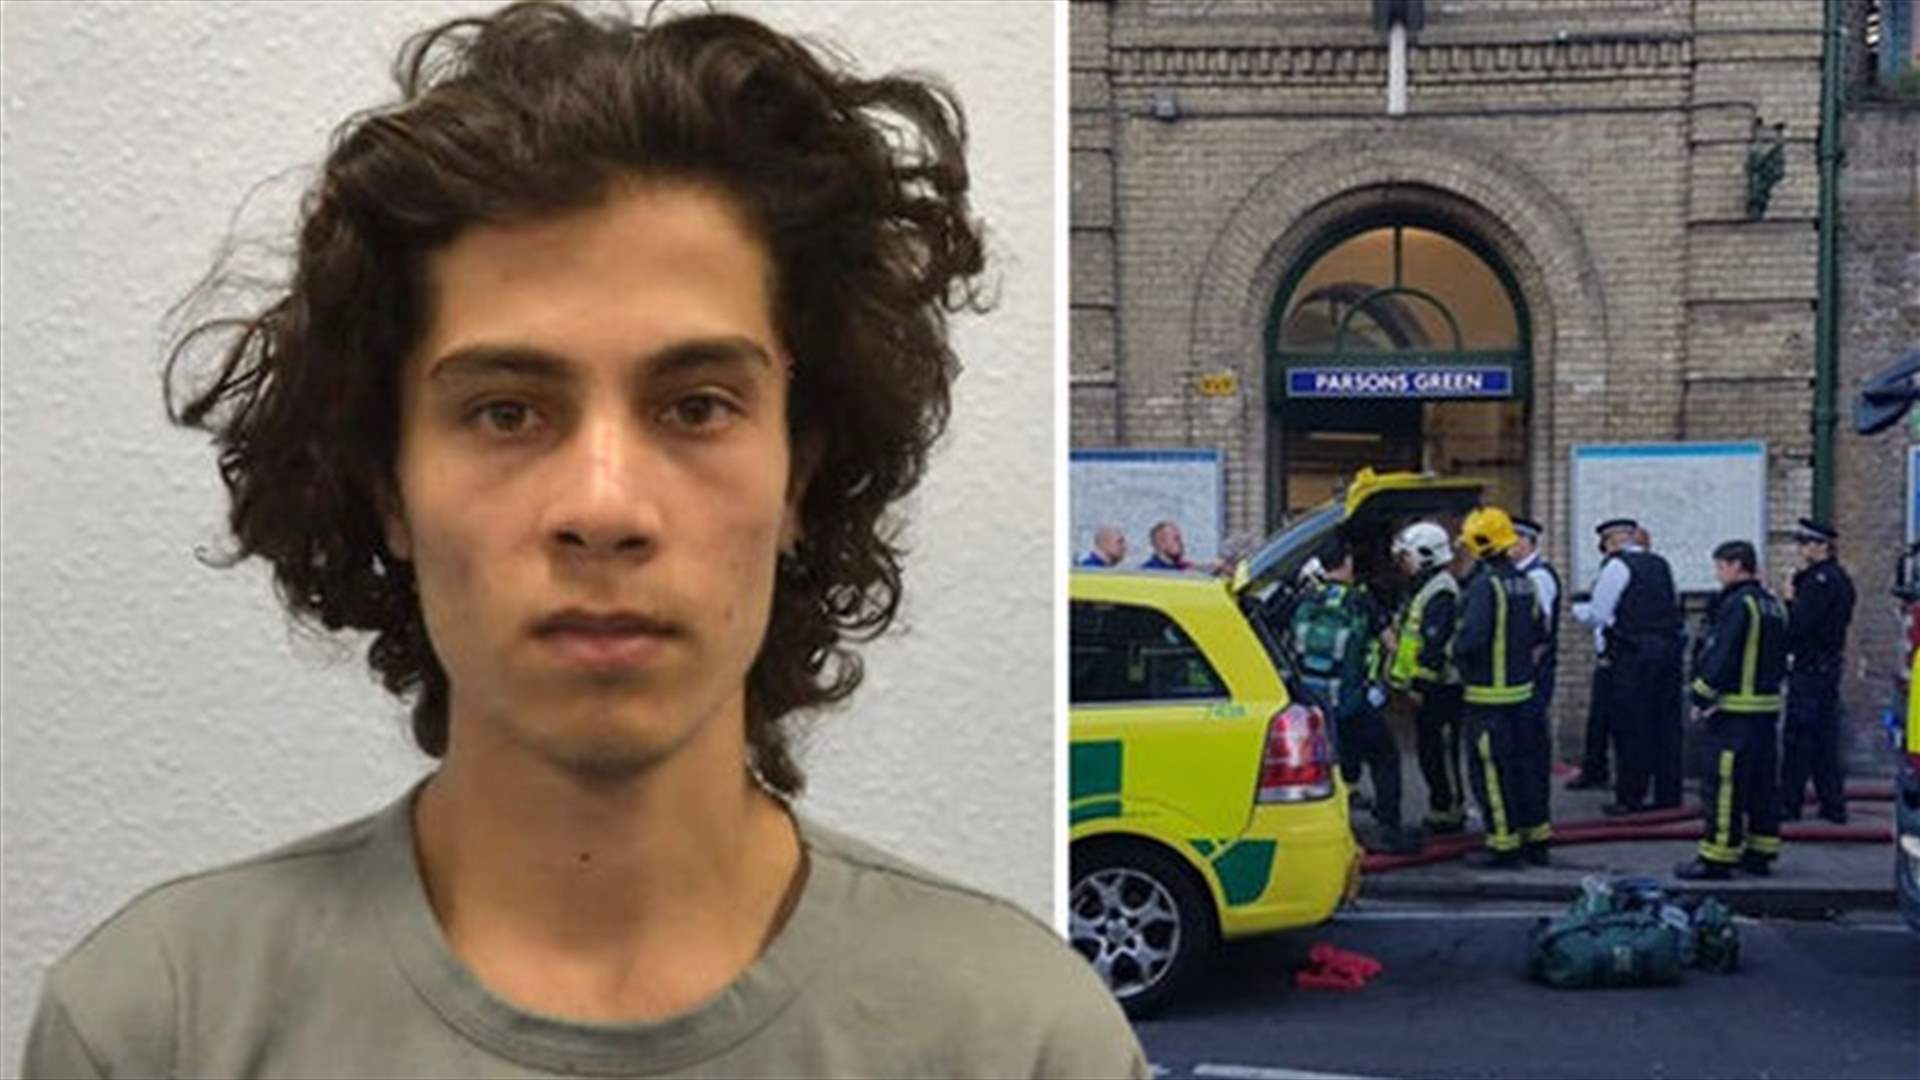 Teenager who tried to bomb London train jailed for 34 years